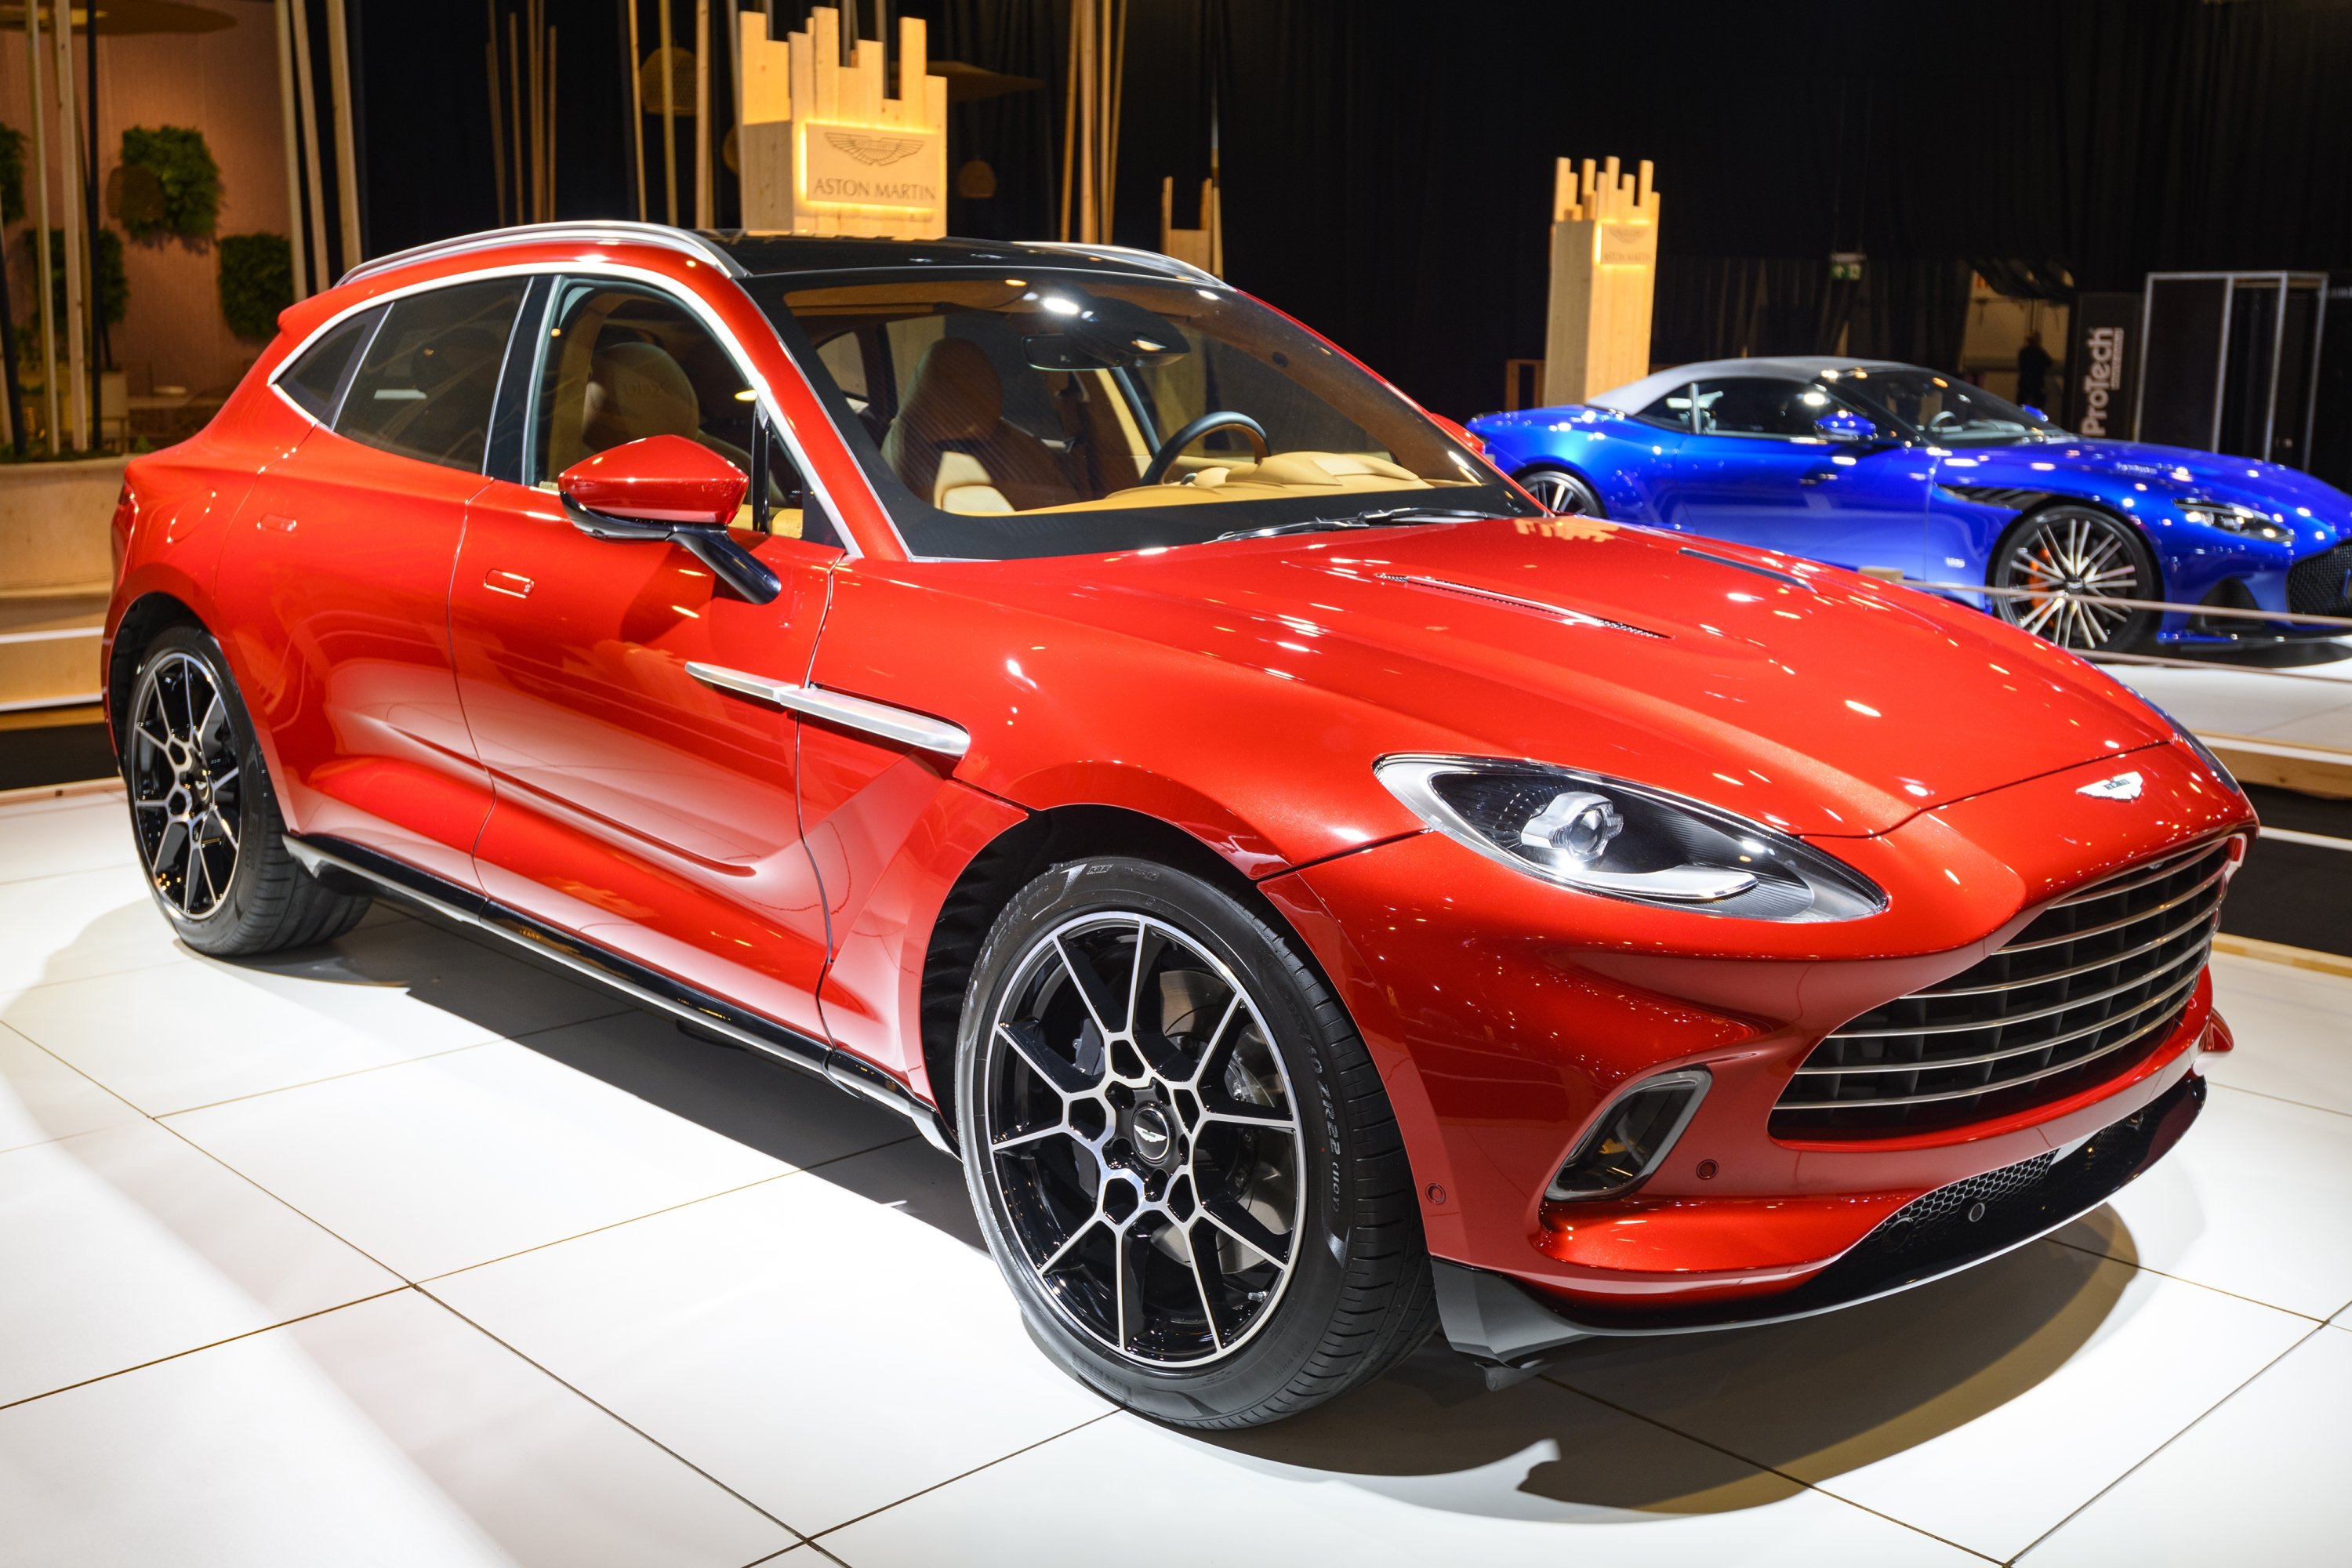 Lights shine on an Aston Martin DBX on display at the Brussels Expo in Brussels, Belgium, Jan. 8, 2020. (Getty Images)